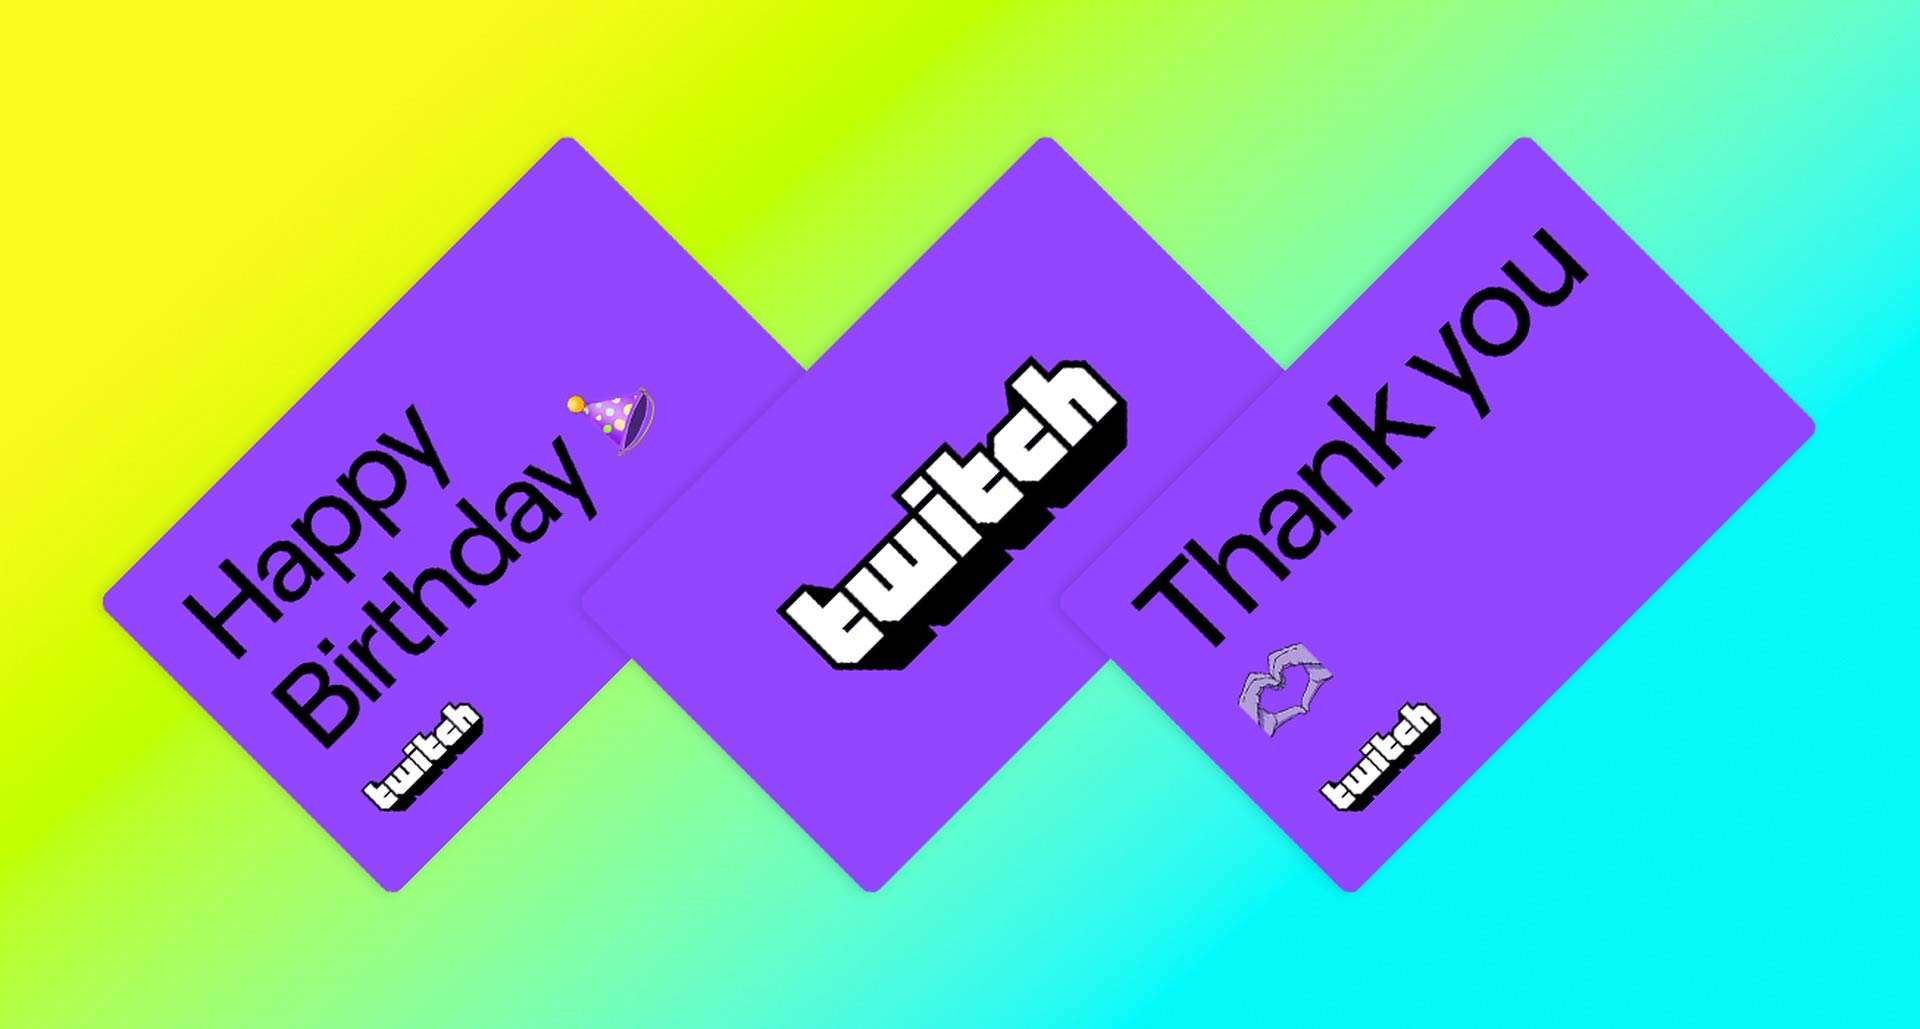 Twitch gift cards are now available in Australia, Canada, and the UK
